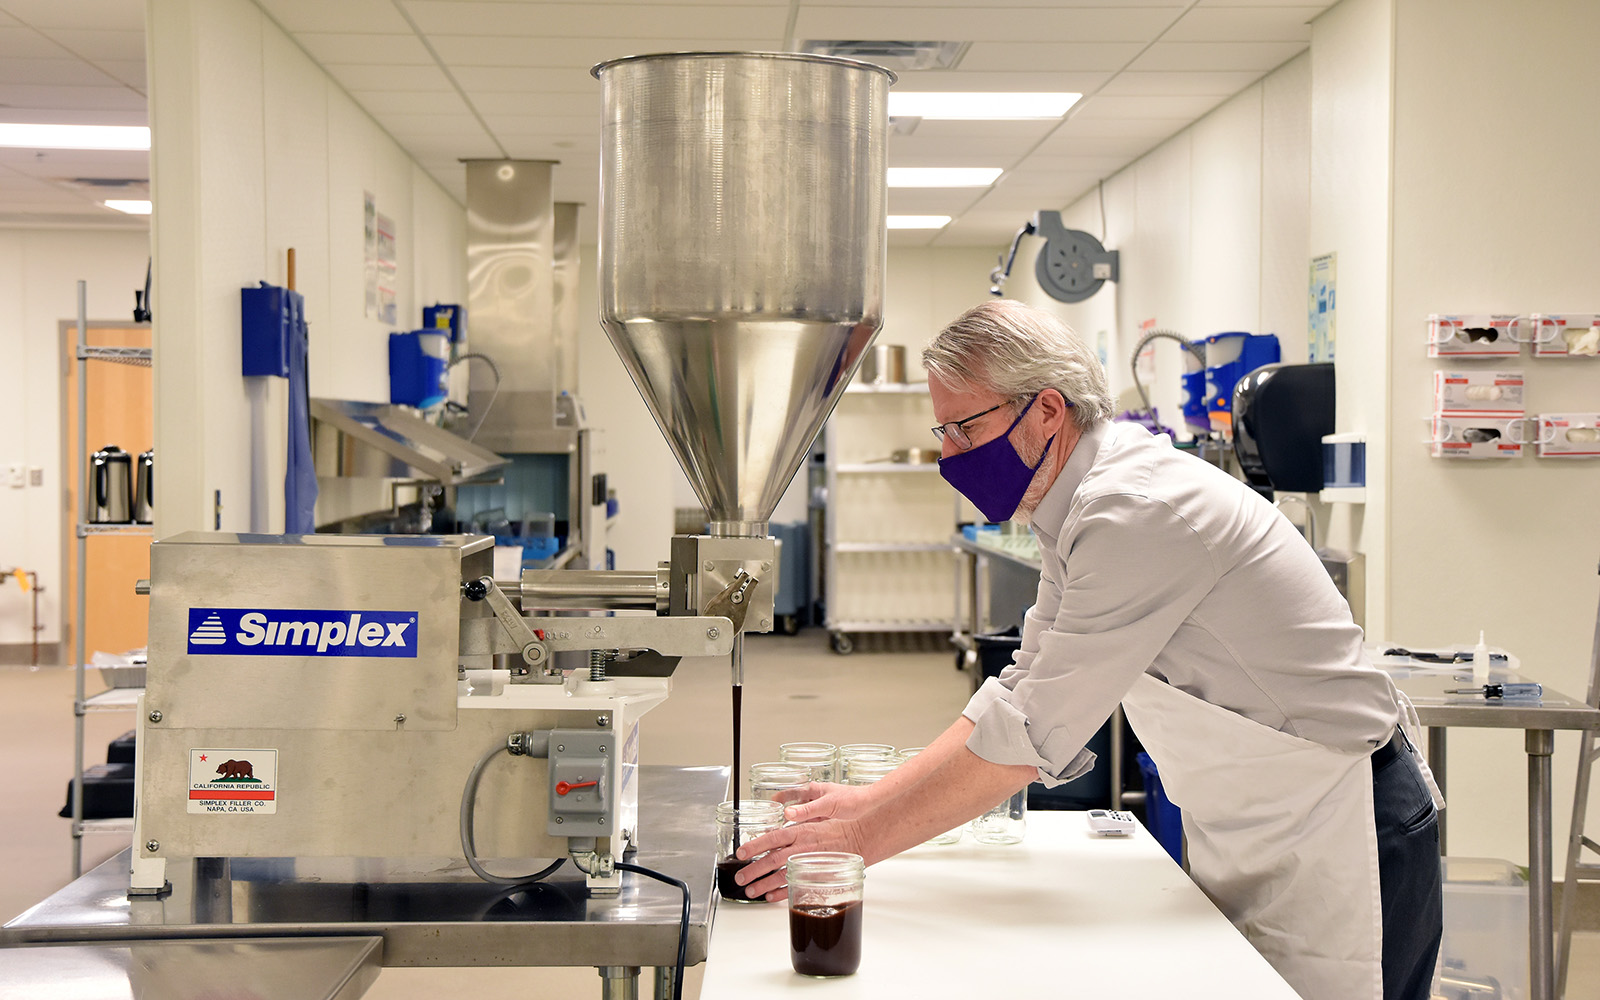 Bryan Severns using the Simplex filler to fill jars with chocolate sauce.